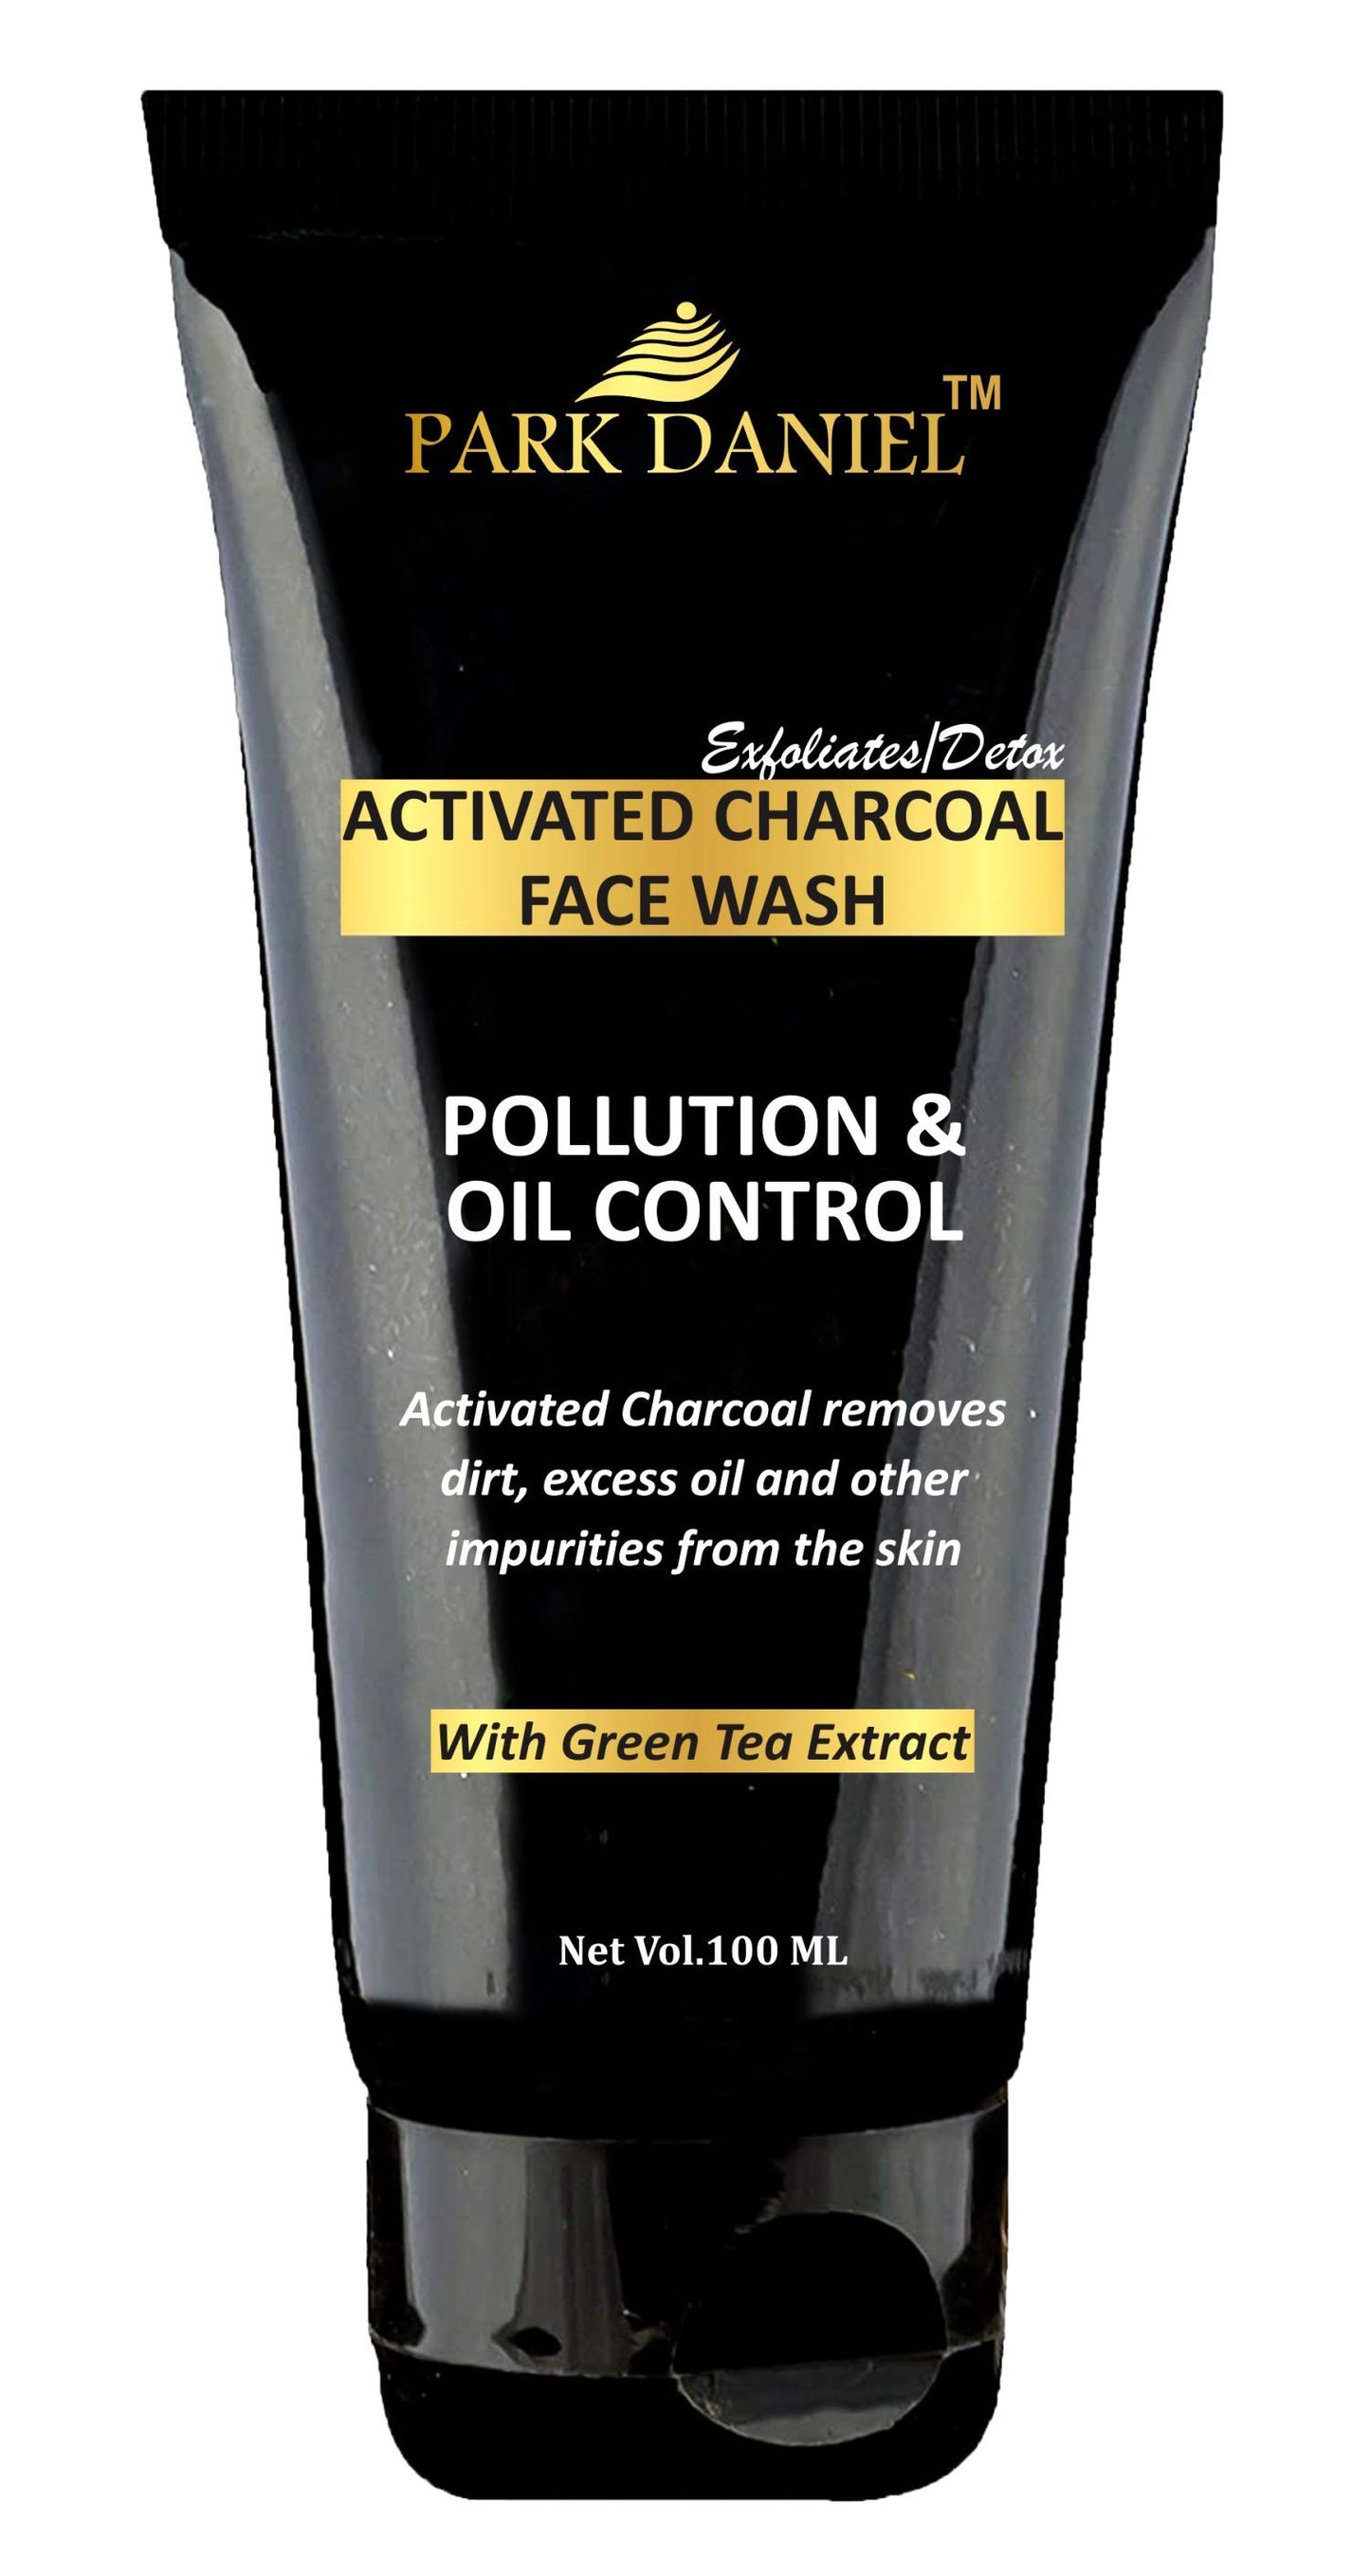 Park Daniel Activated Charcoal Face Wash -Pollution & Oil Control- To Remove Dirt, Excess Oil (100 ML), Black